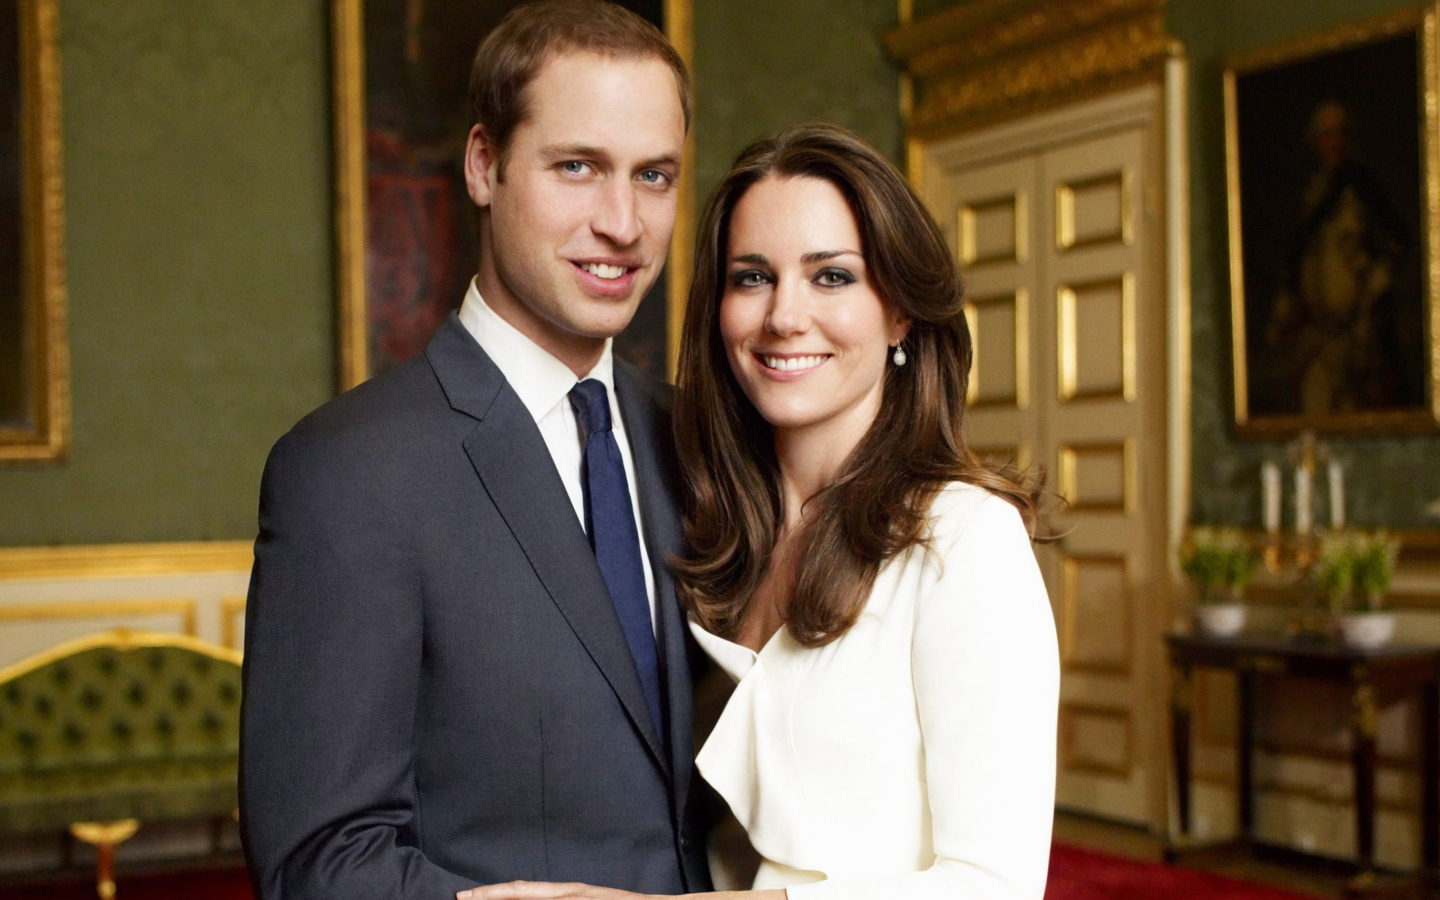 Prince William And Kate Middleton wallpaper 1440x900